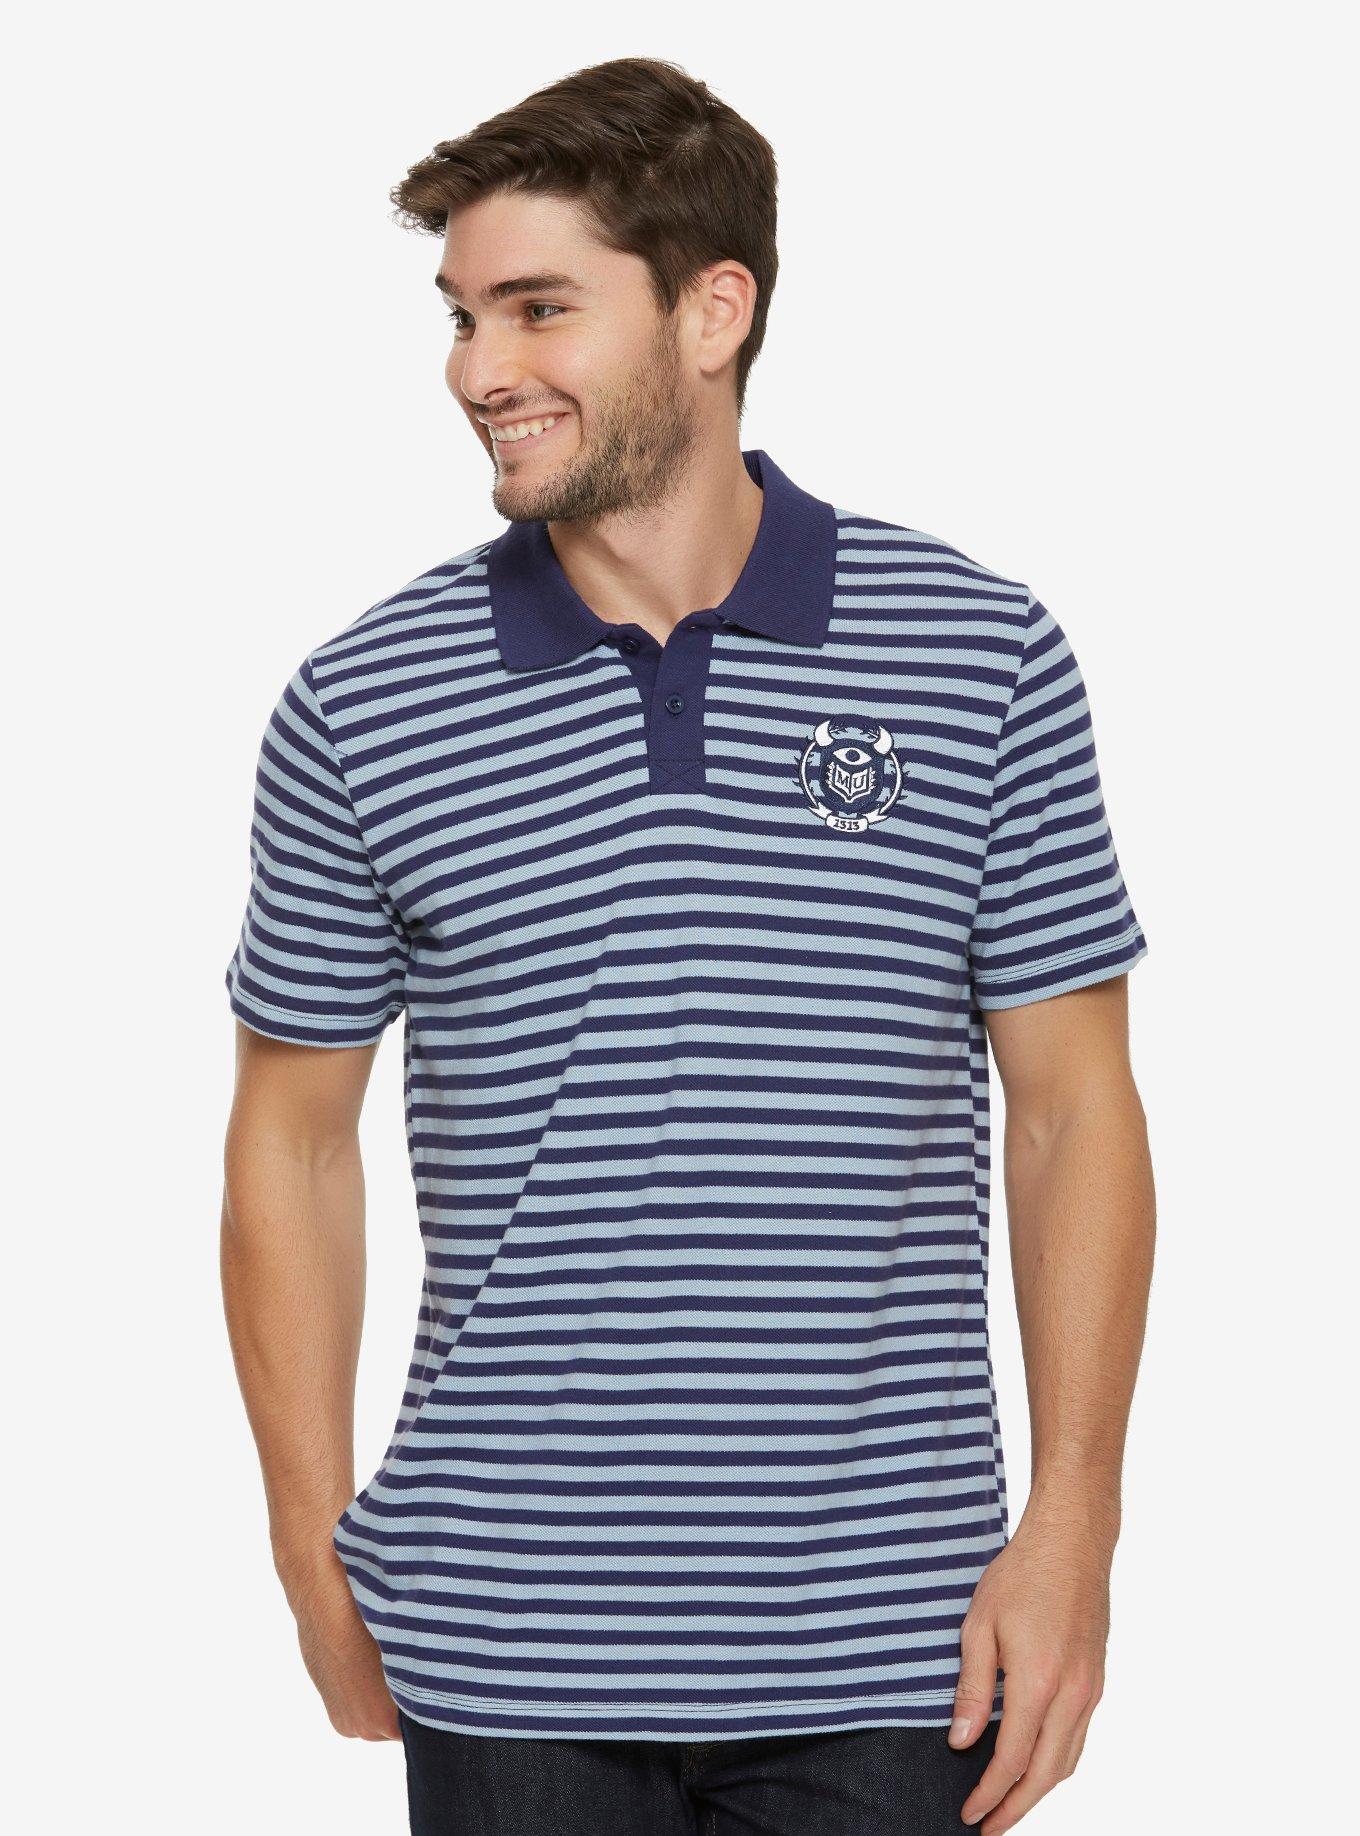 Disney Pixar Monsters University Striped Polo Shirt - BoxLunch Exclusive, GREY, hi-res